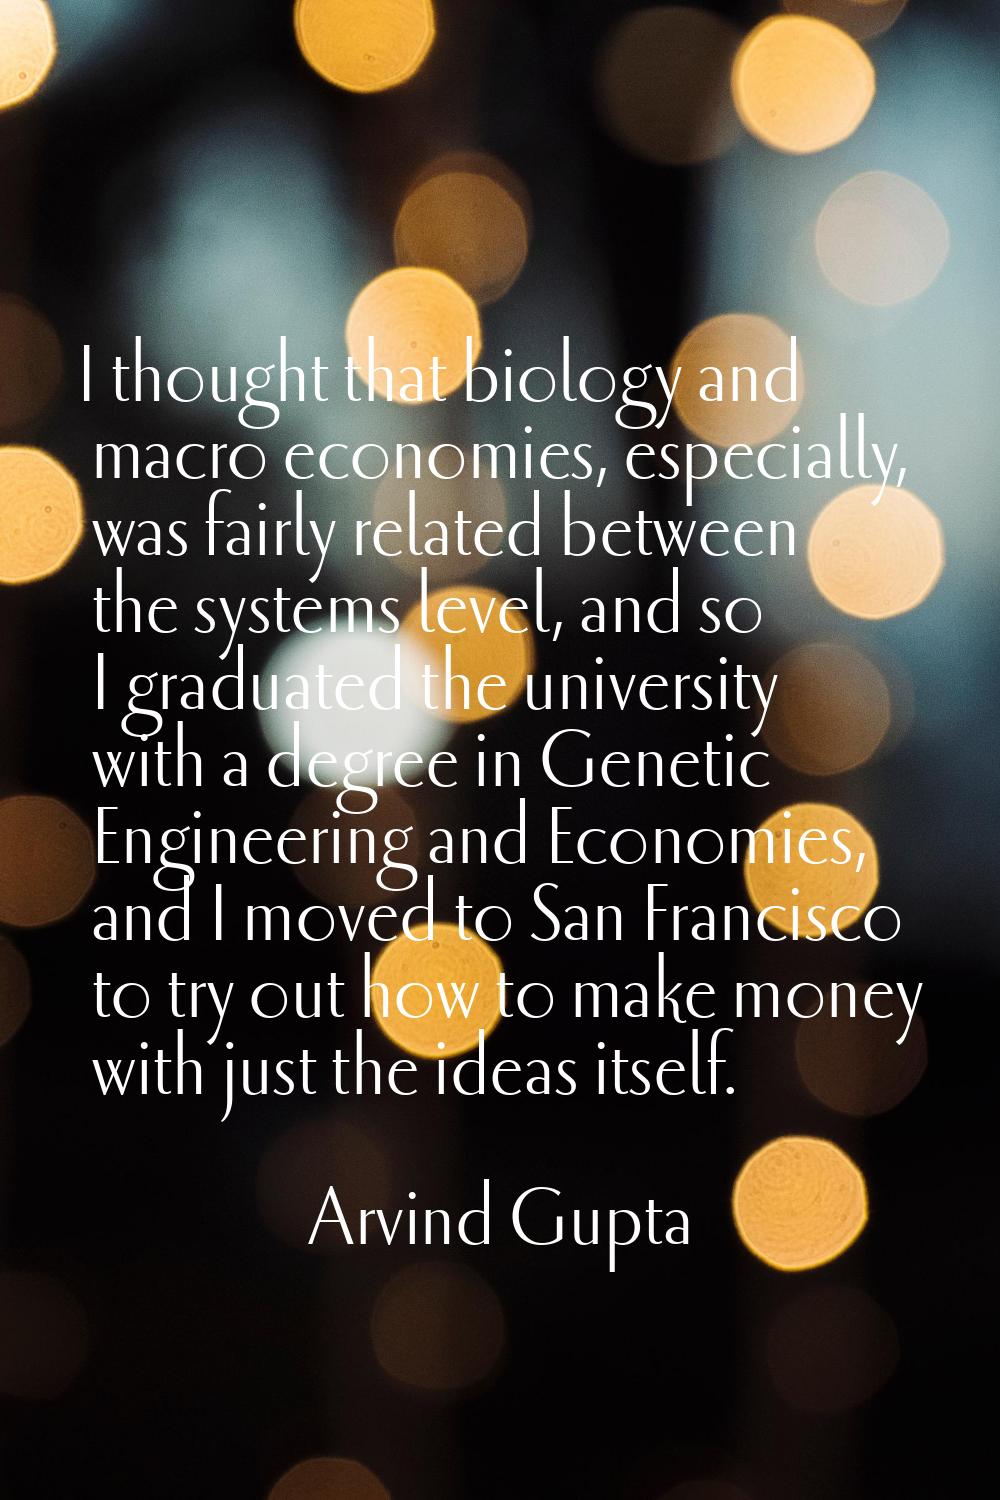 I thought that biology and macro economies, especially, was fairly related between the systems leve